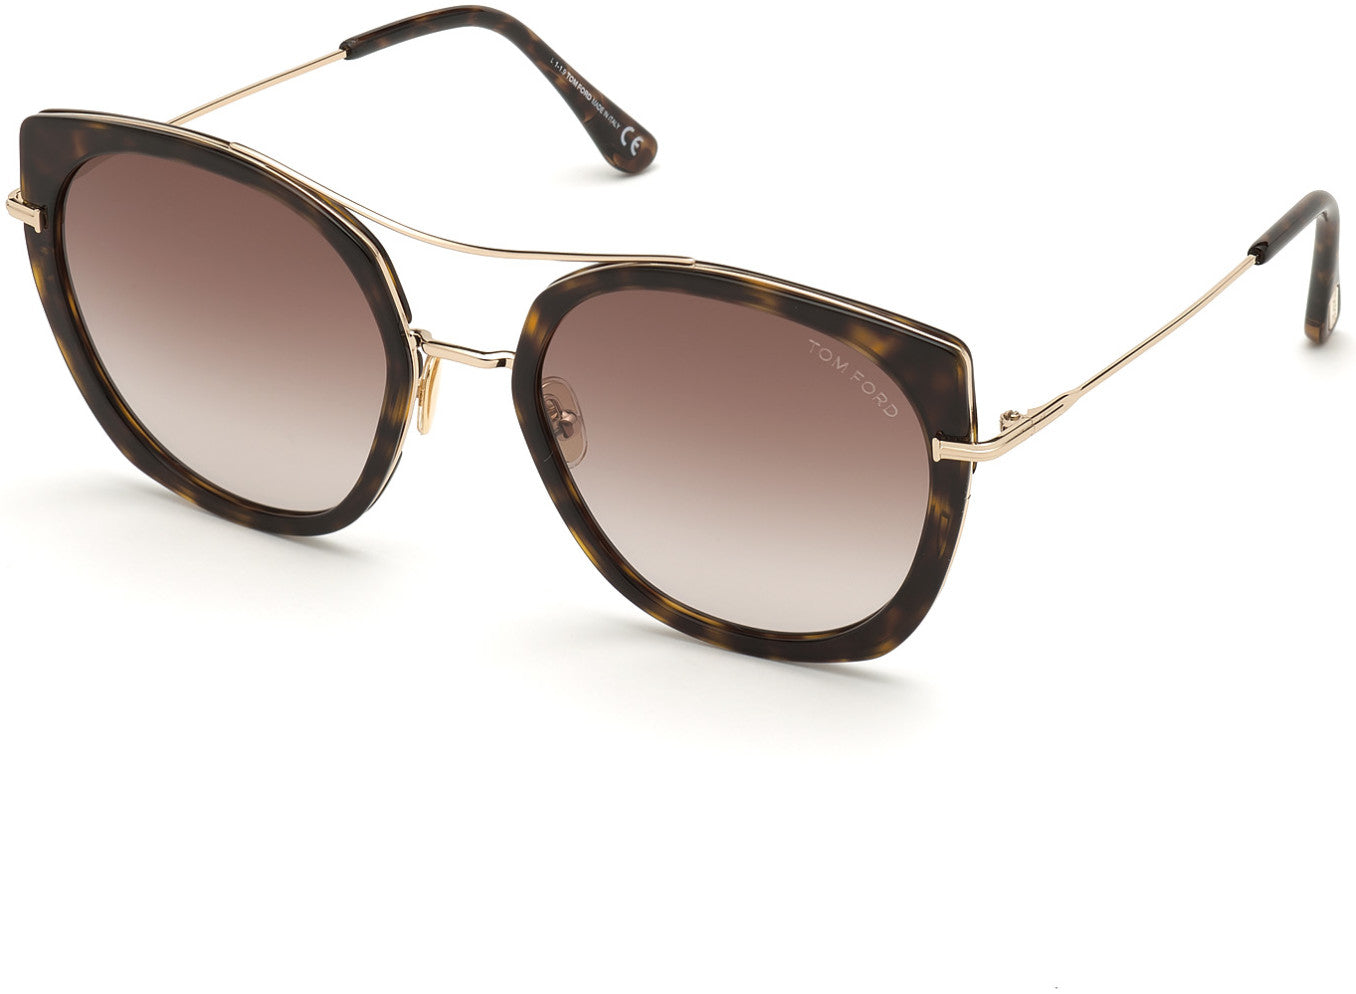 Brown Round acetate sunglasses, Tom Ford